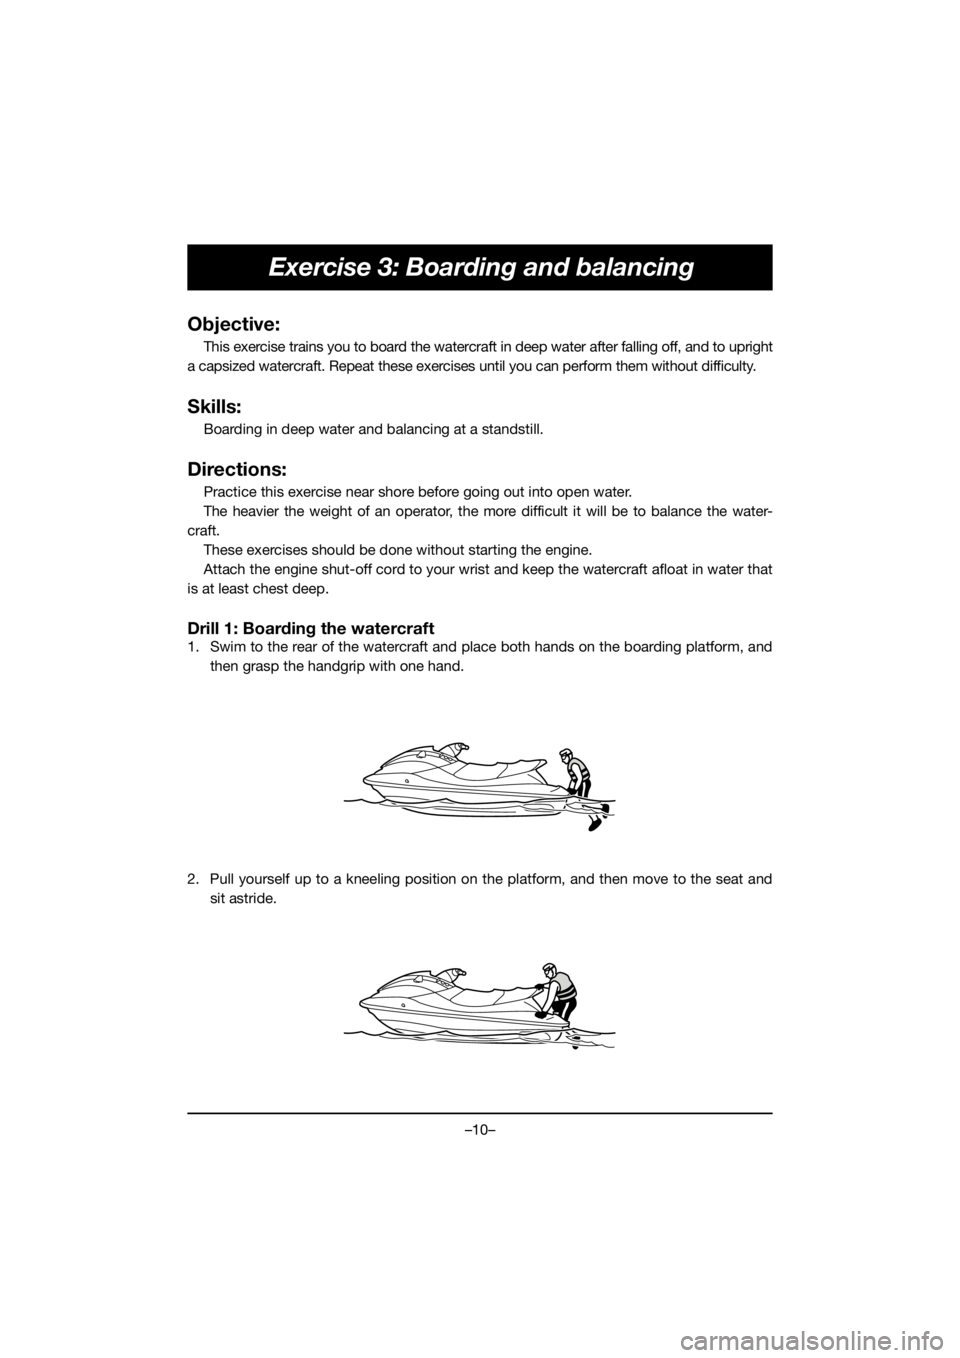 YAMAHA EX SPORT 2020  Owners Manual –10–
Exercise 3: Boarding and balancing
Objective:
This exercise trains you to board the watercraft in deep water after falling off, and to upright
a capsized watercraft. Repeat these exercises un